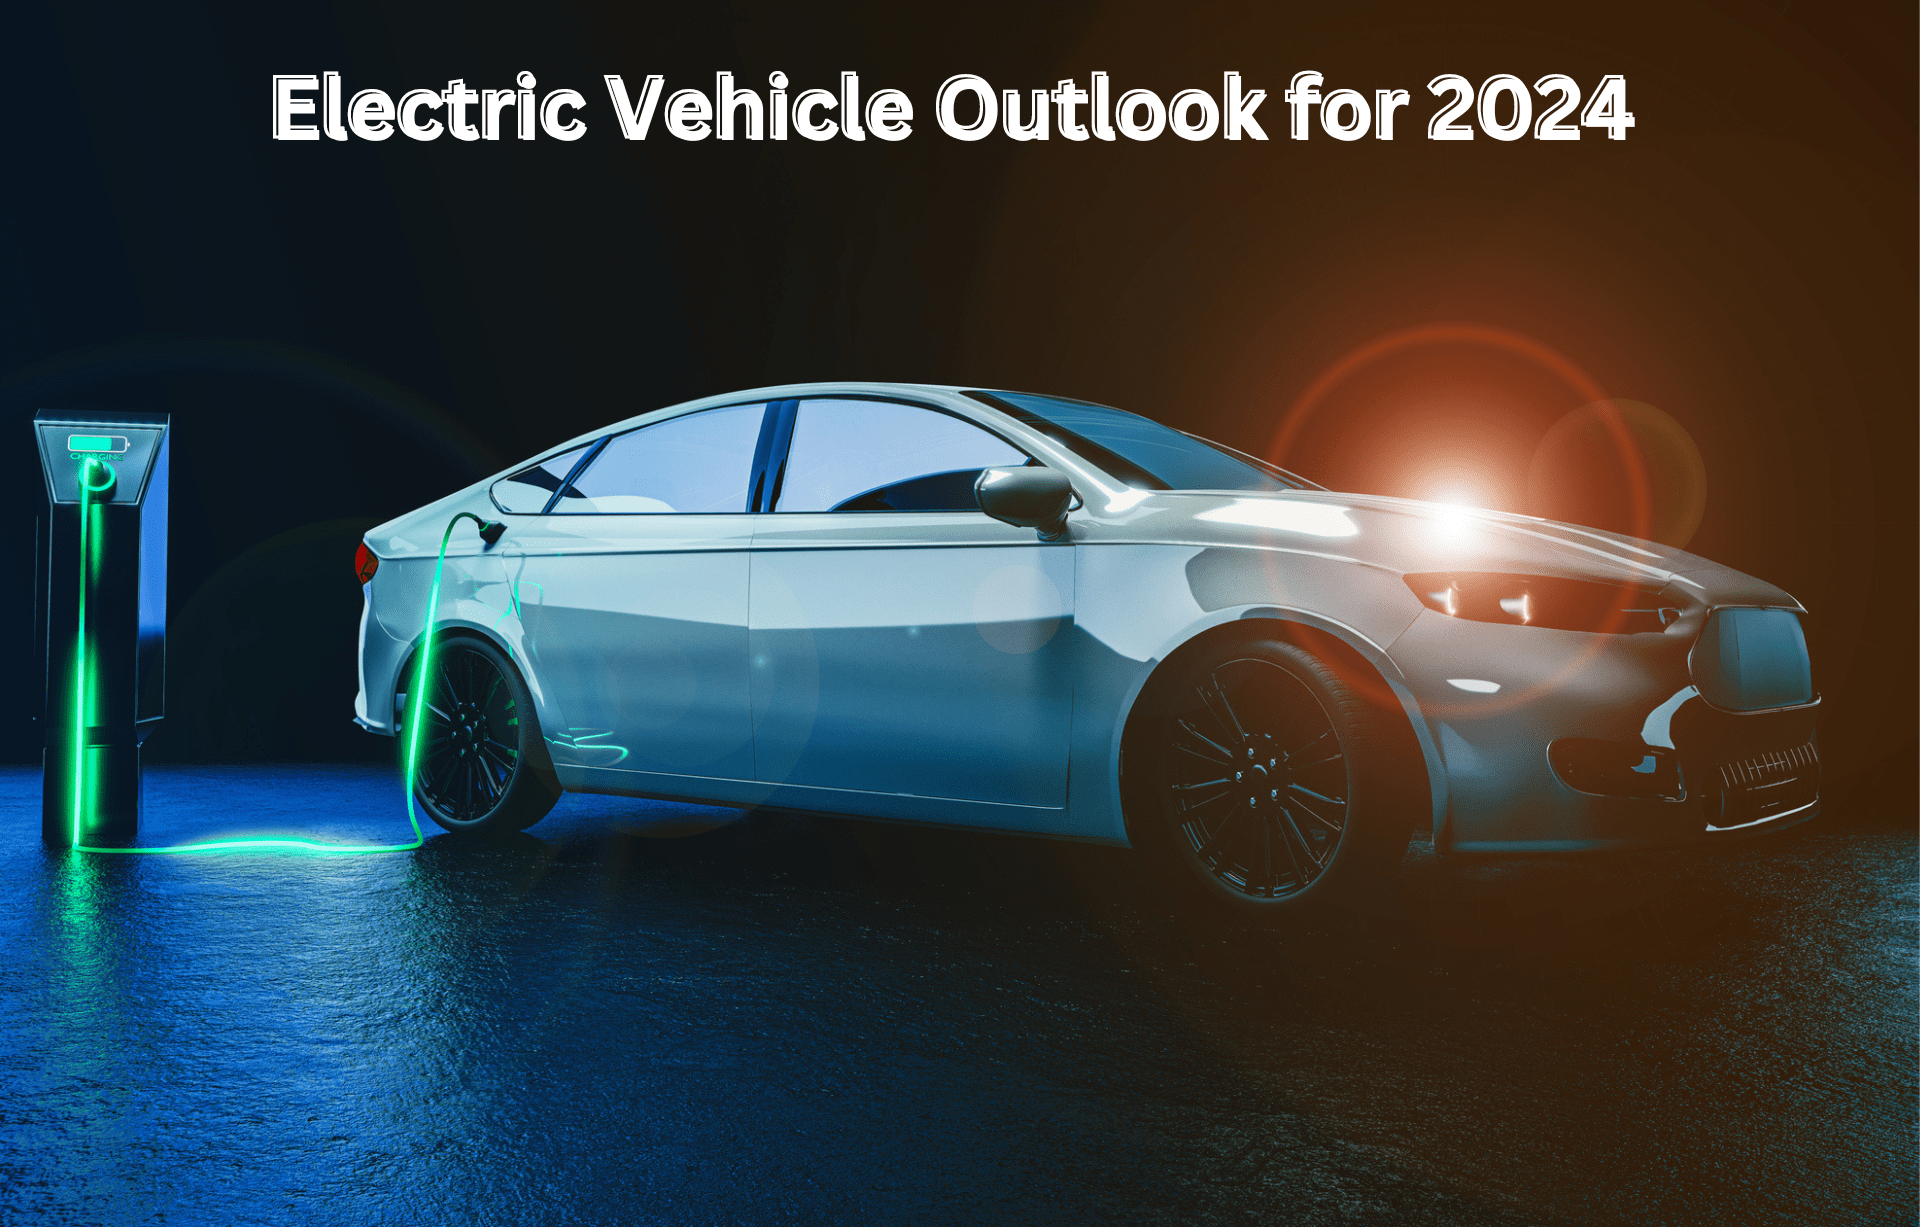 Electric Vehicle Outlook for 2024